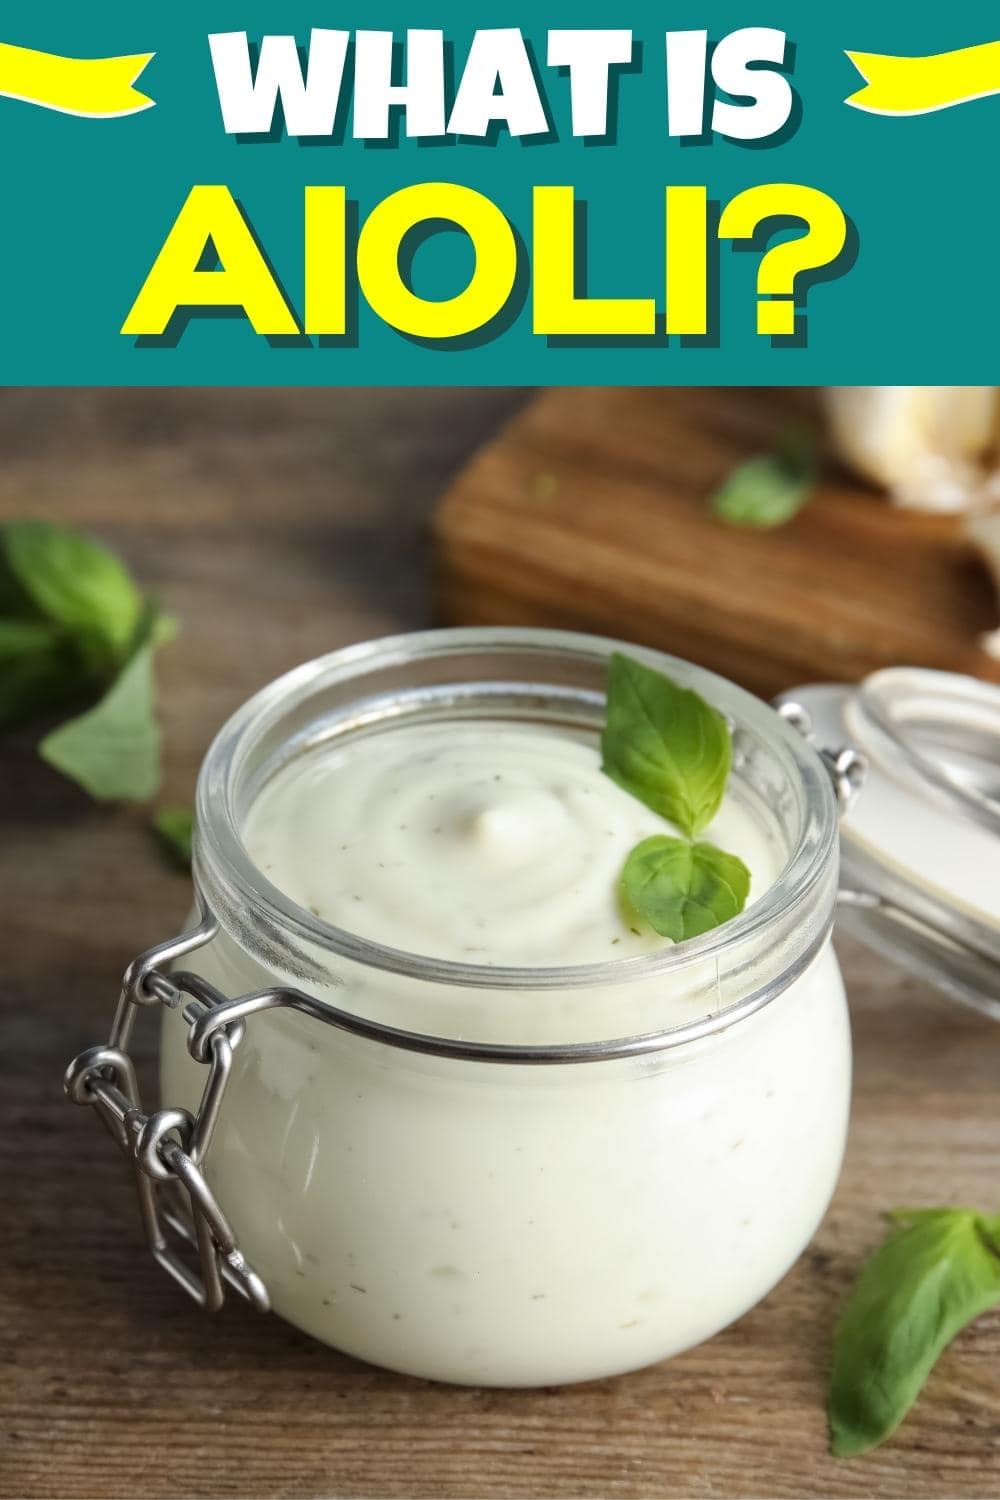 What Is Aioli?